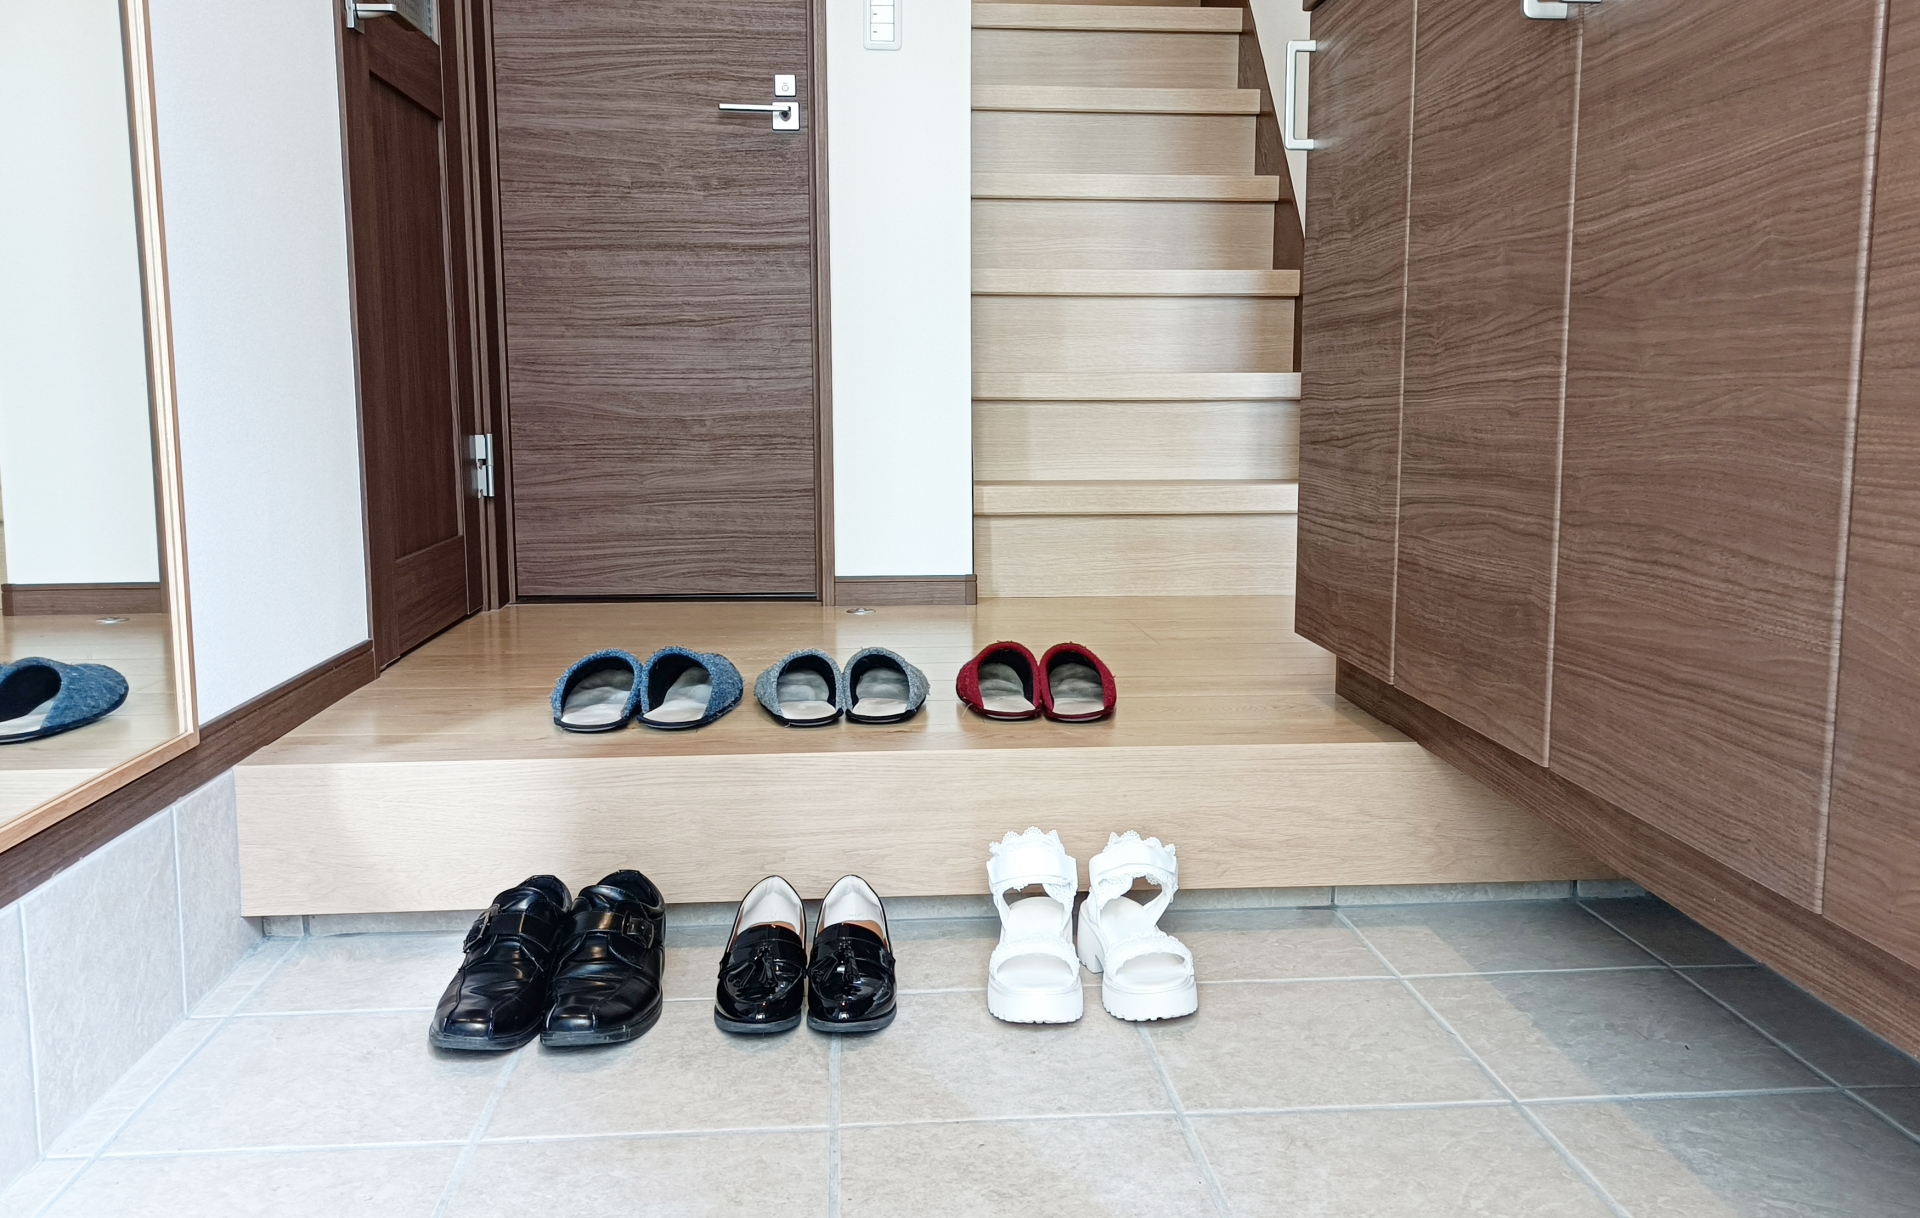 Some shoes are placed in an entrance porch. They are facing in the door direction.